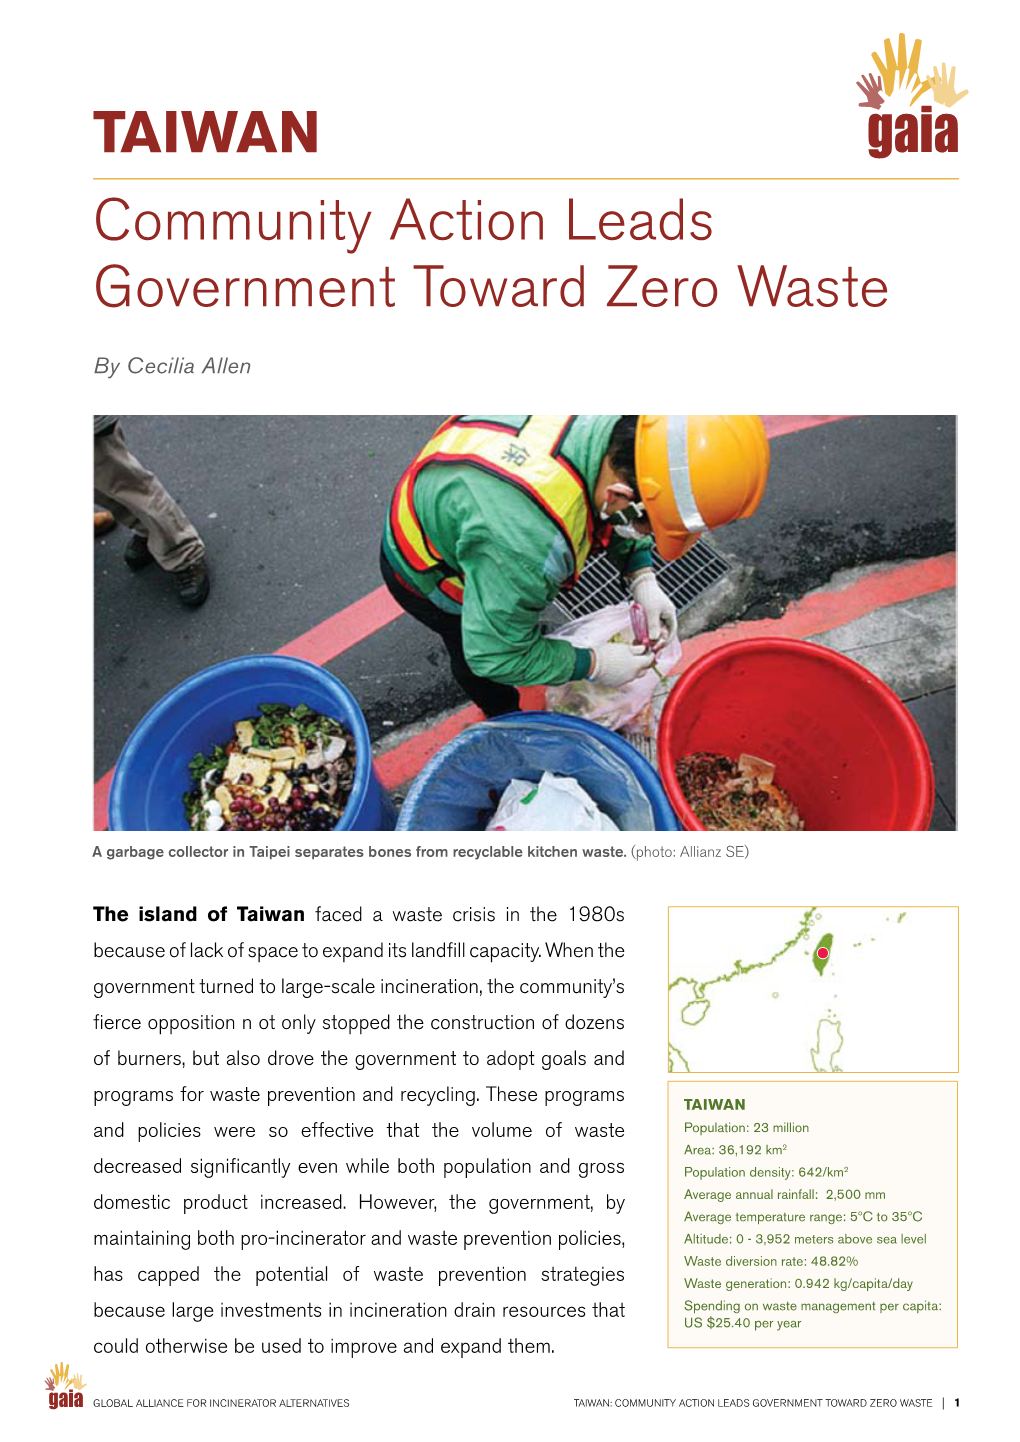 Taiwan Global Anti-Incinerator Alliance Community Action Leads Government Toward Zero Waste